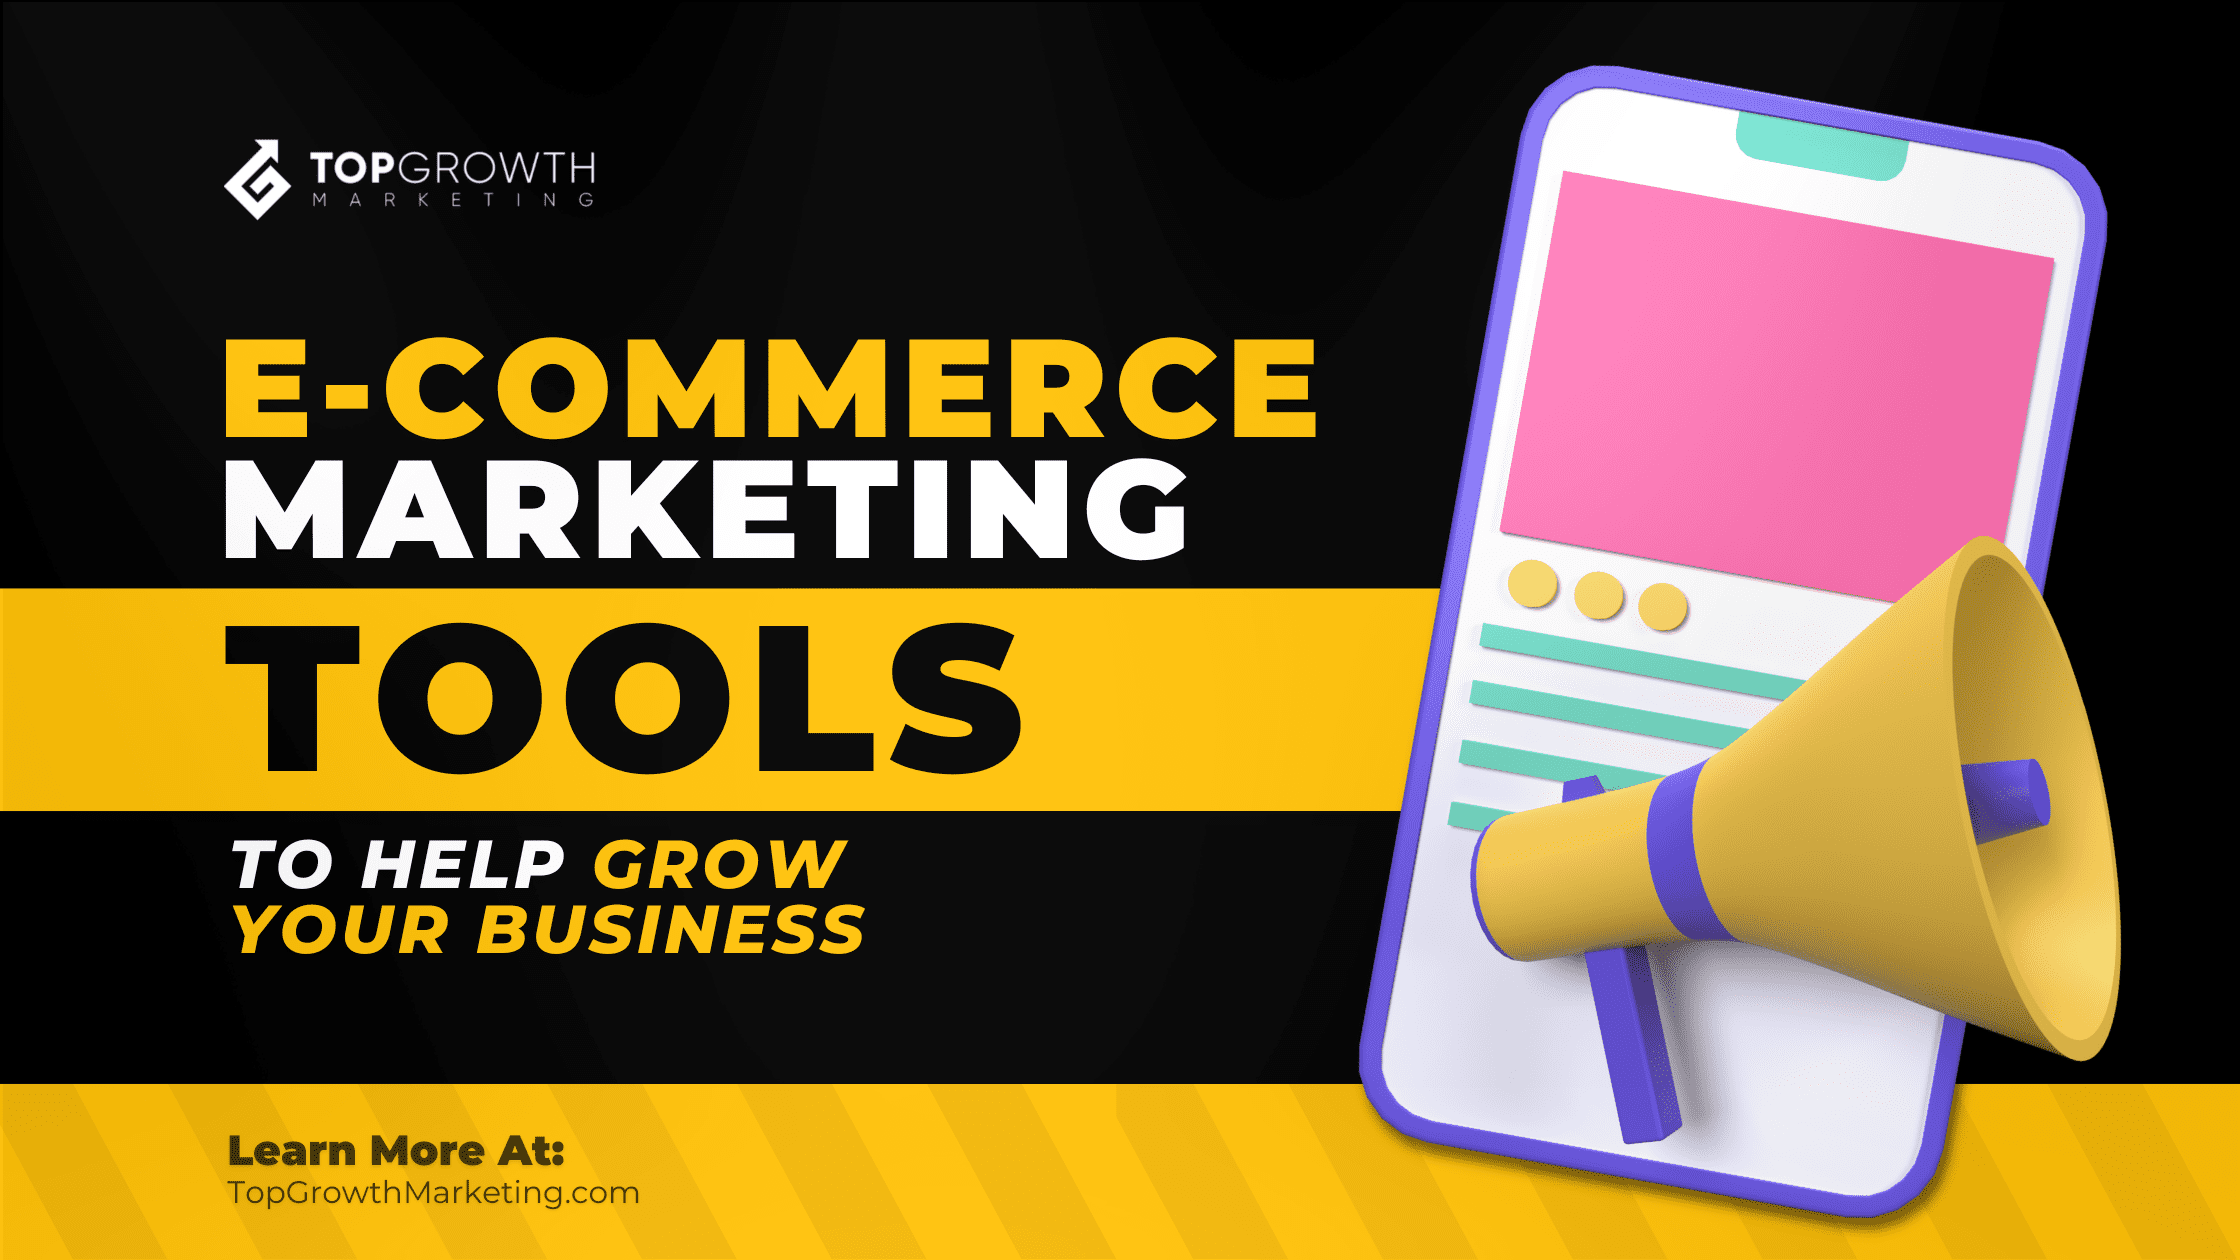 Our 10 Favorite E-Commerce Tools To Grow Your Business